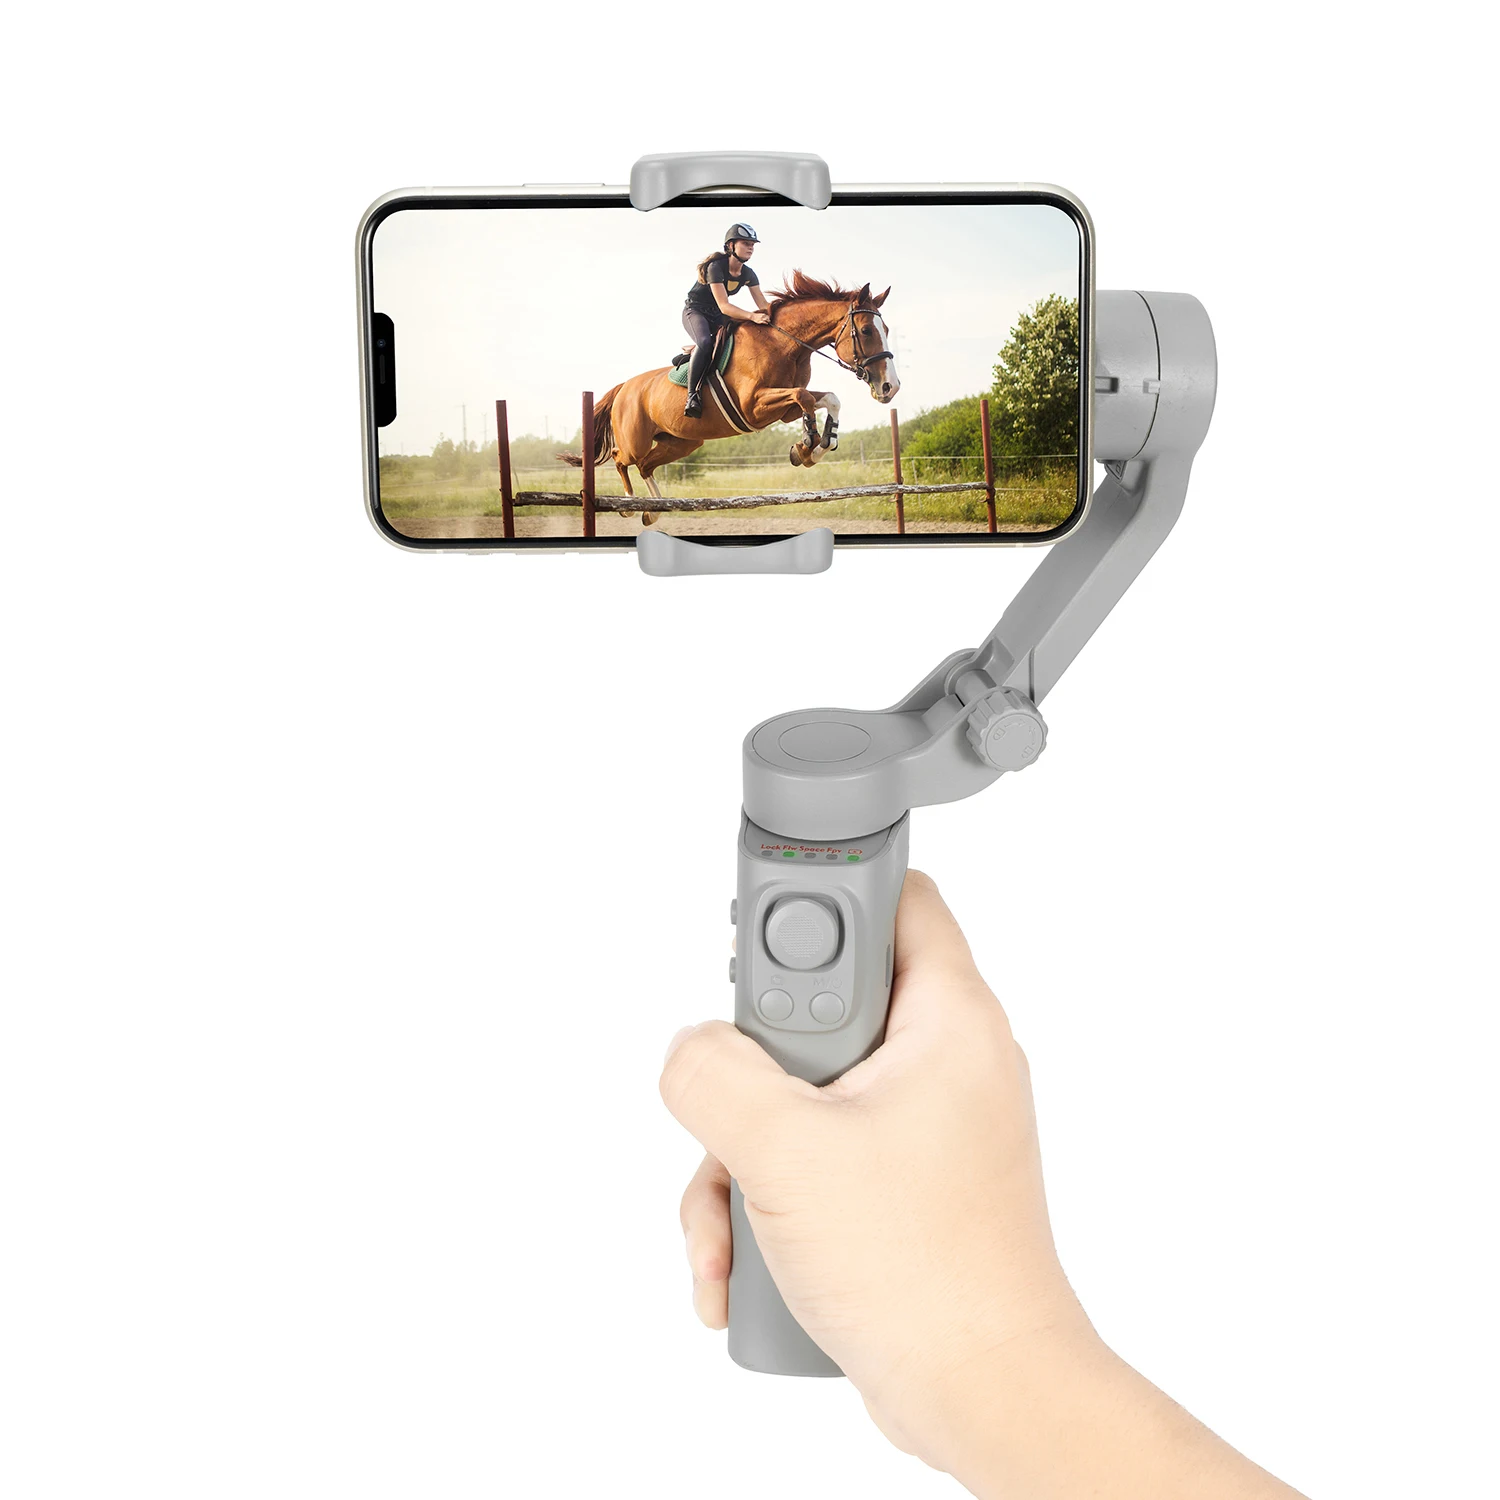 

KALIOU New Arrival F5 3 Axis 360 Rotation Phone Gimbal Stabilizer Smart Auto Tracking Foldable Phone Gimbal Stabilizer